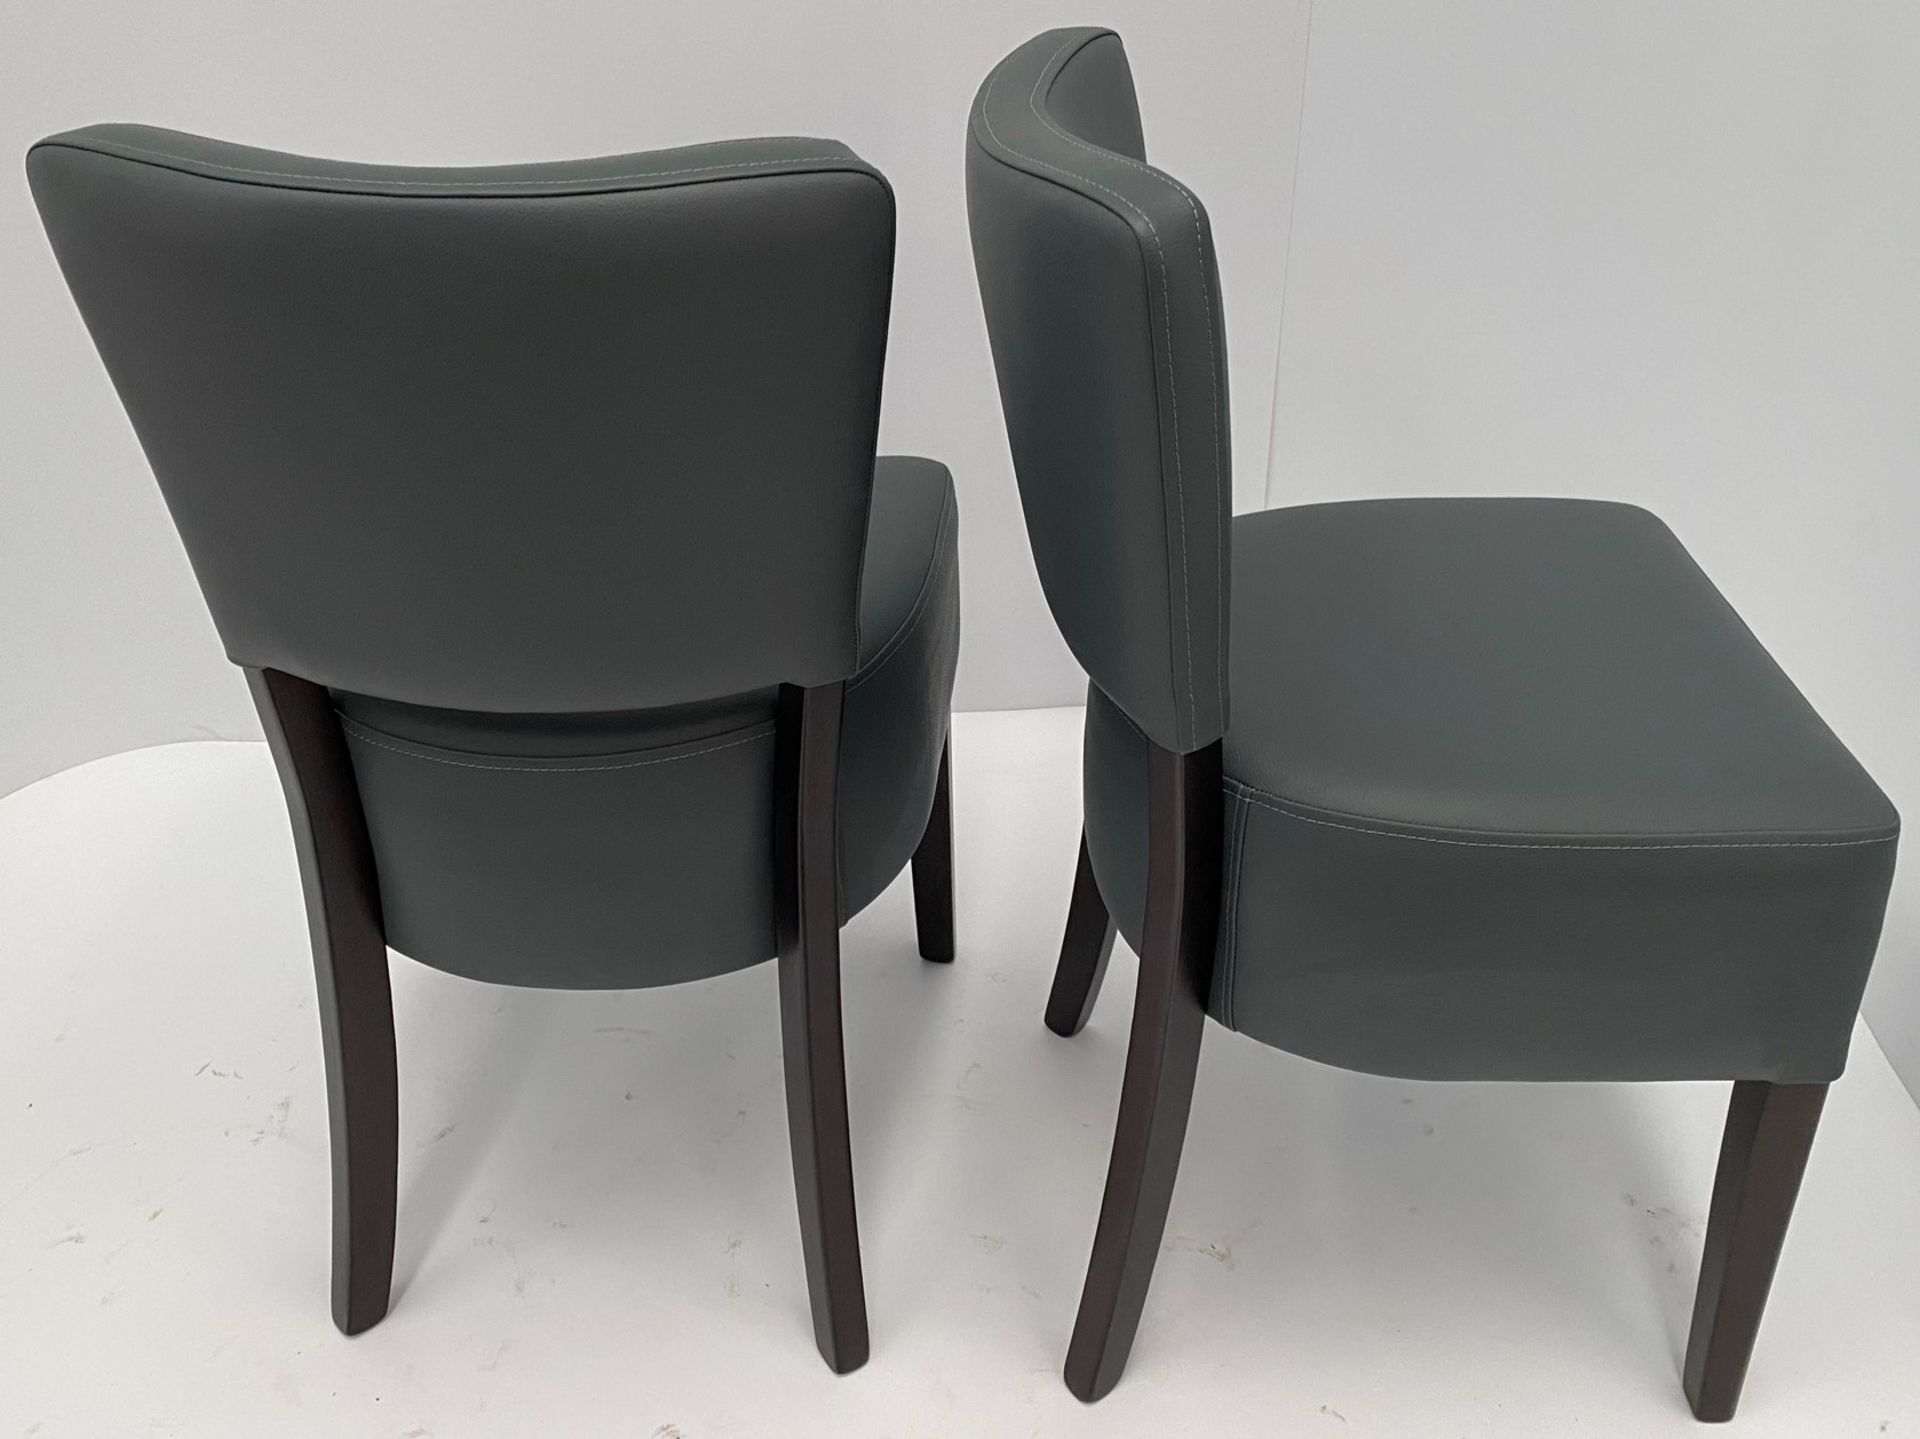 2 x Memphis Vena SA-4 Grey side/dining chairs with Wenge coloured frames - Image 2 of 3